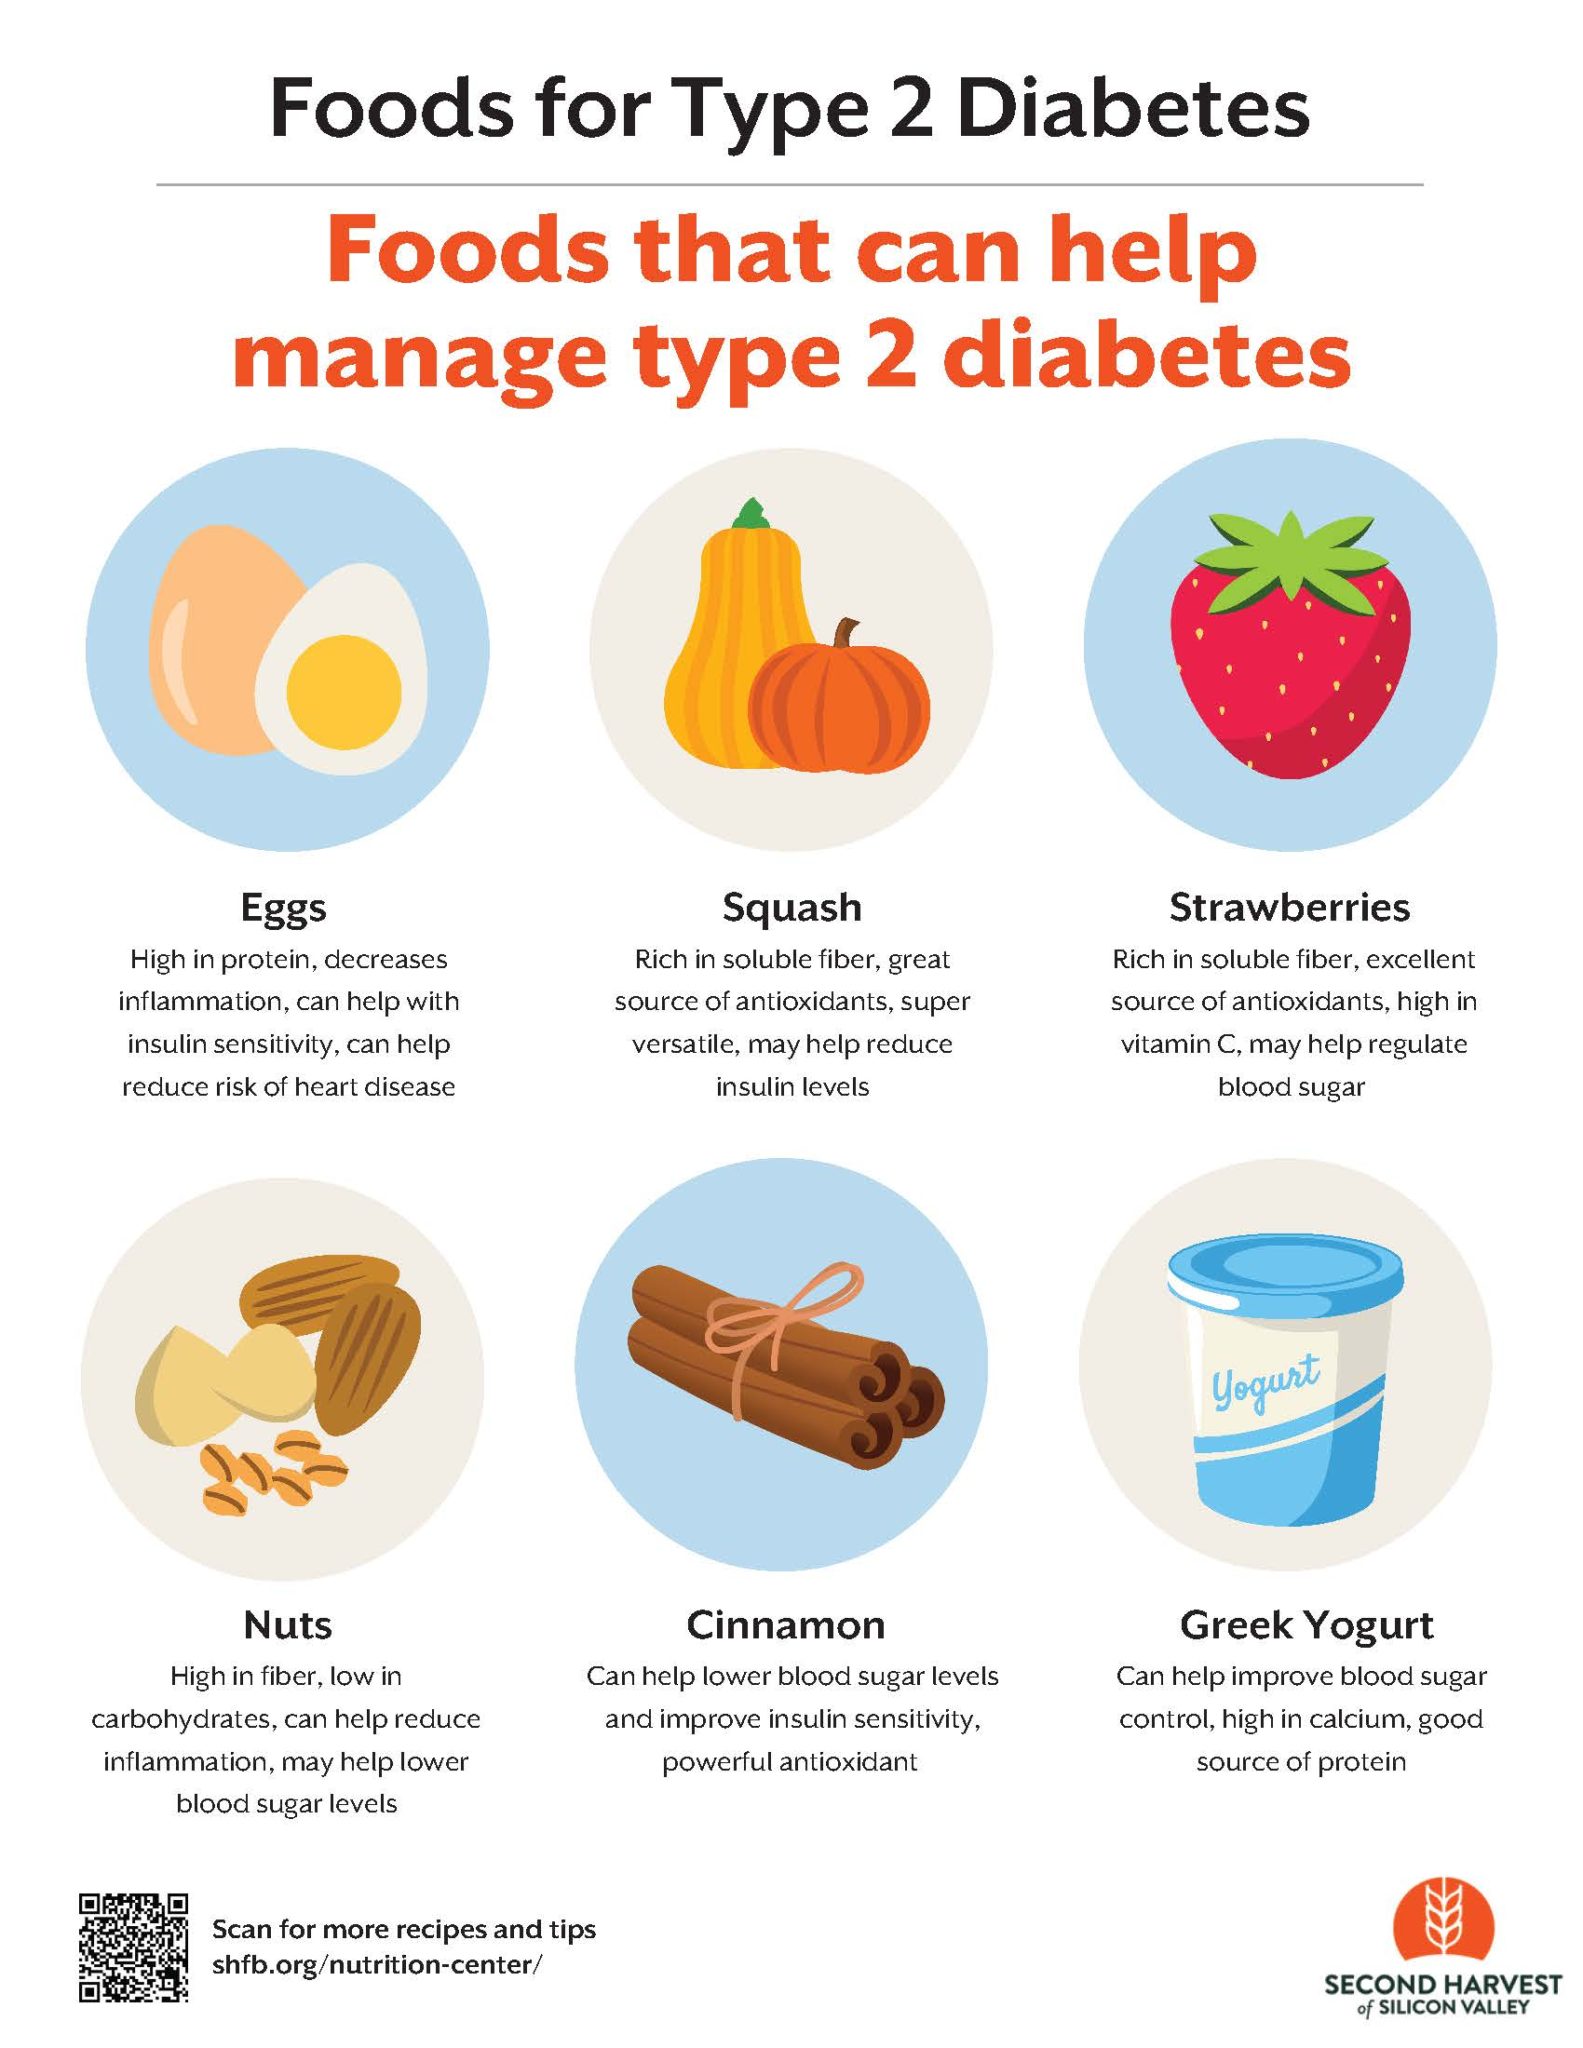 Foods that can help manage type 2 diabetes